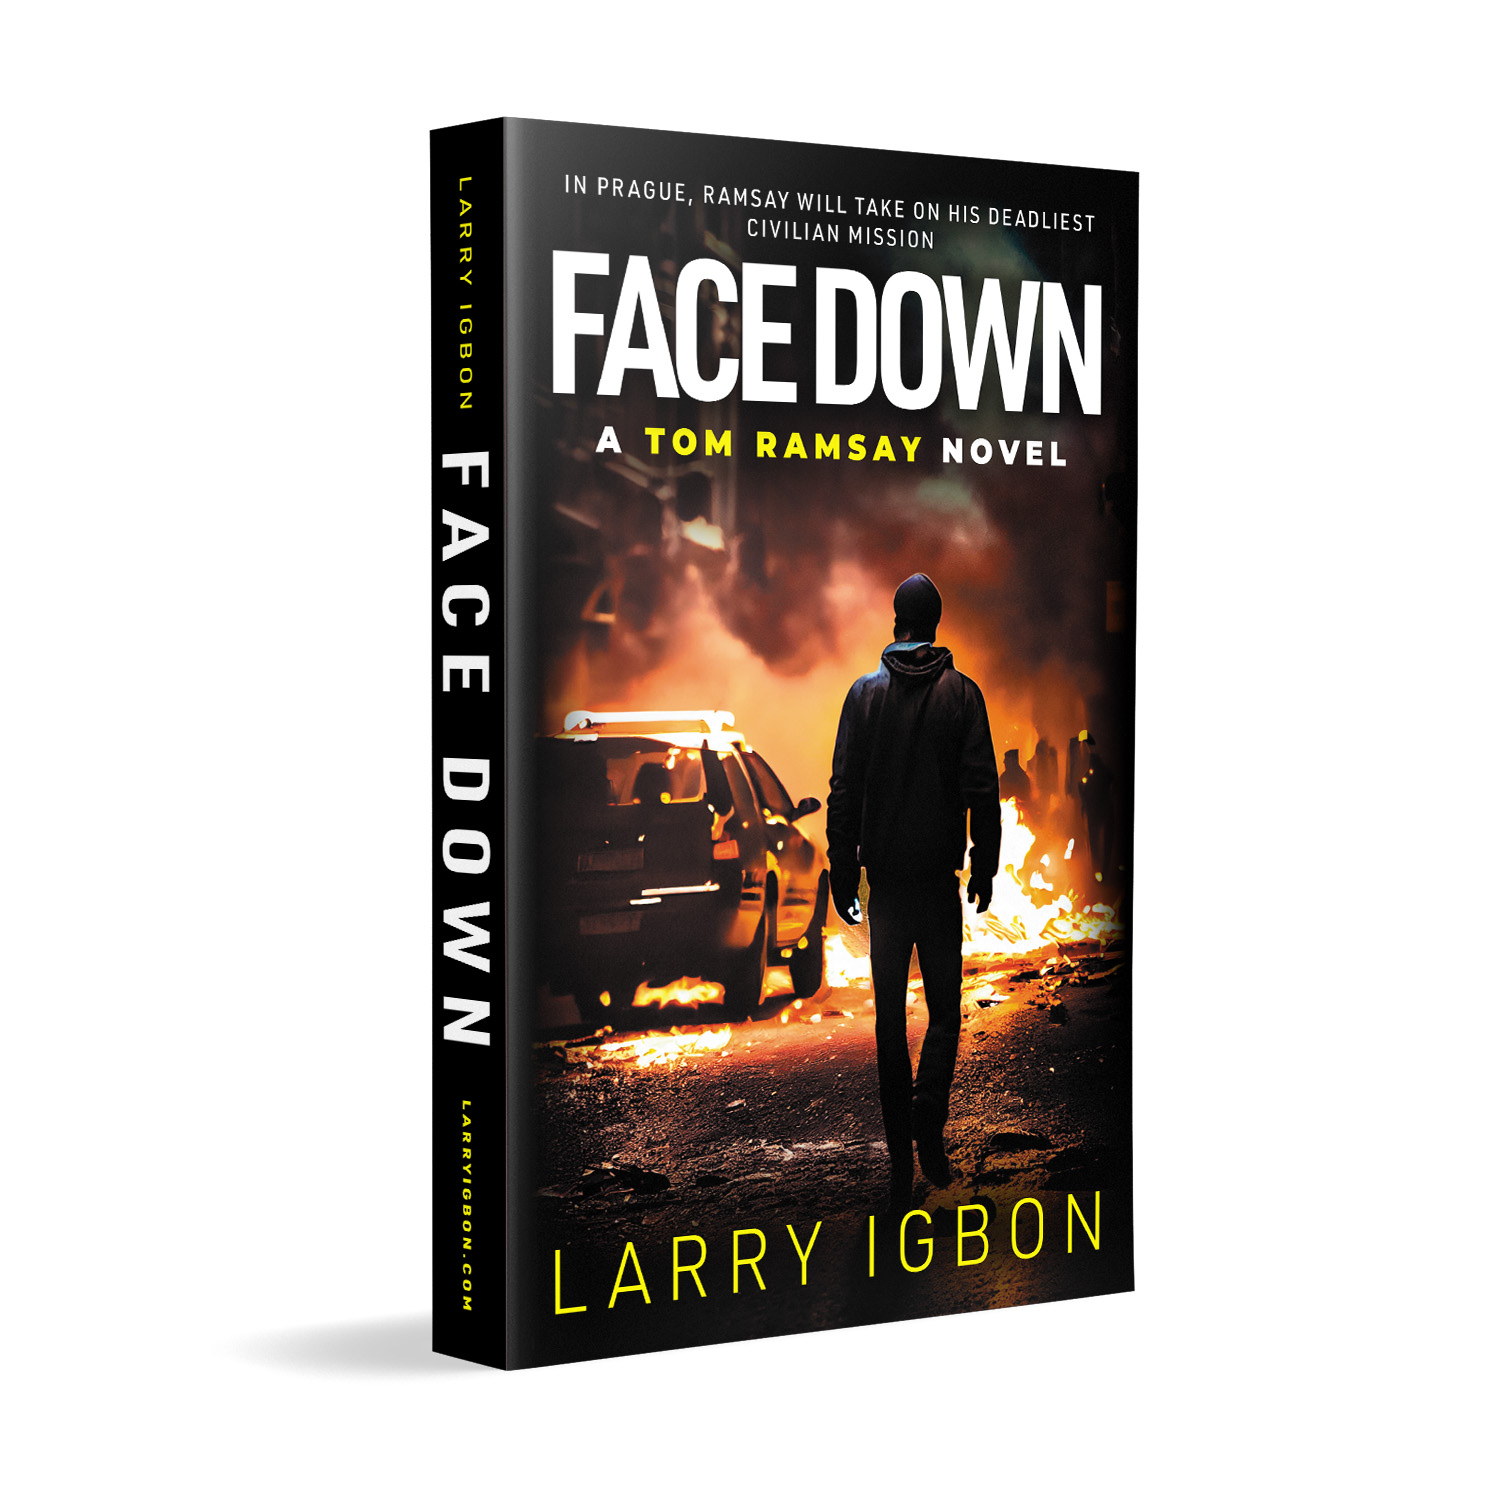 'Face Down' is a gritty action thriller in the 'Tom Ramsay' series. The author is Larry Igbon. The book cover design and interior formatting are by Mark Thomas. To learn more about what Mark could do for your book, please visit coverness.com.